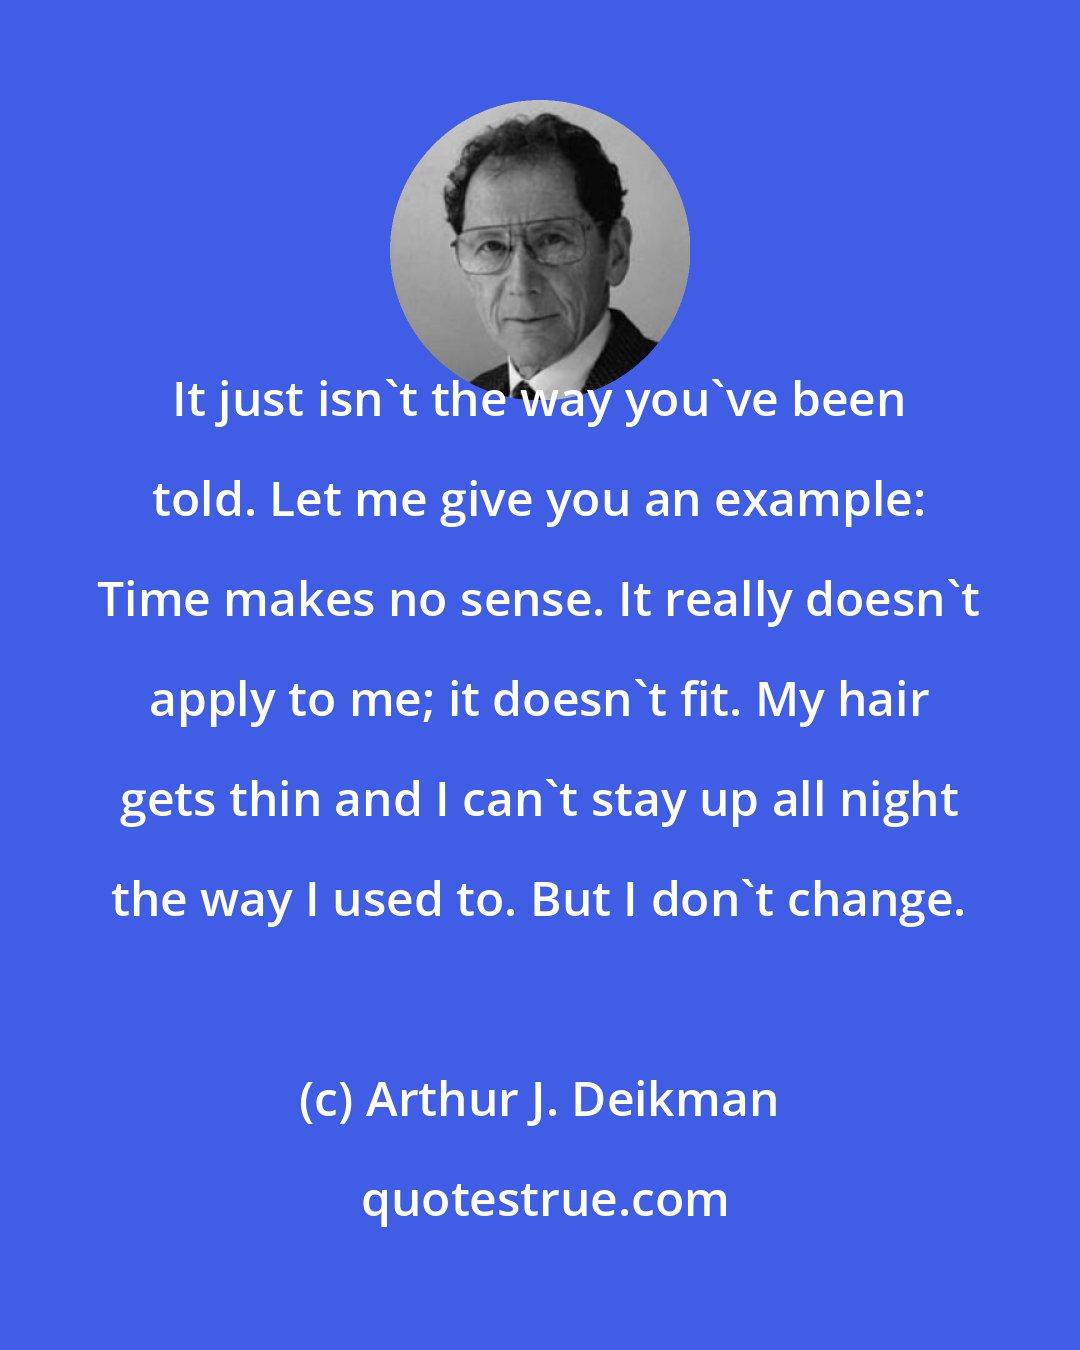 Arthur J. Deikman: It just isn't the way you've been told. Let me give you an example: Time makes no sense. It really doesn't apply to me; it doesn't fit. My hair gets thin and I can't stay up all night the way I used to. But I don't change.